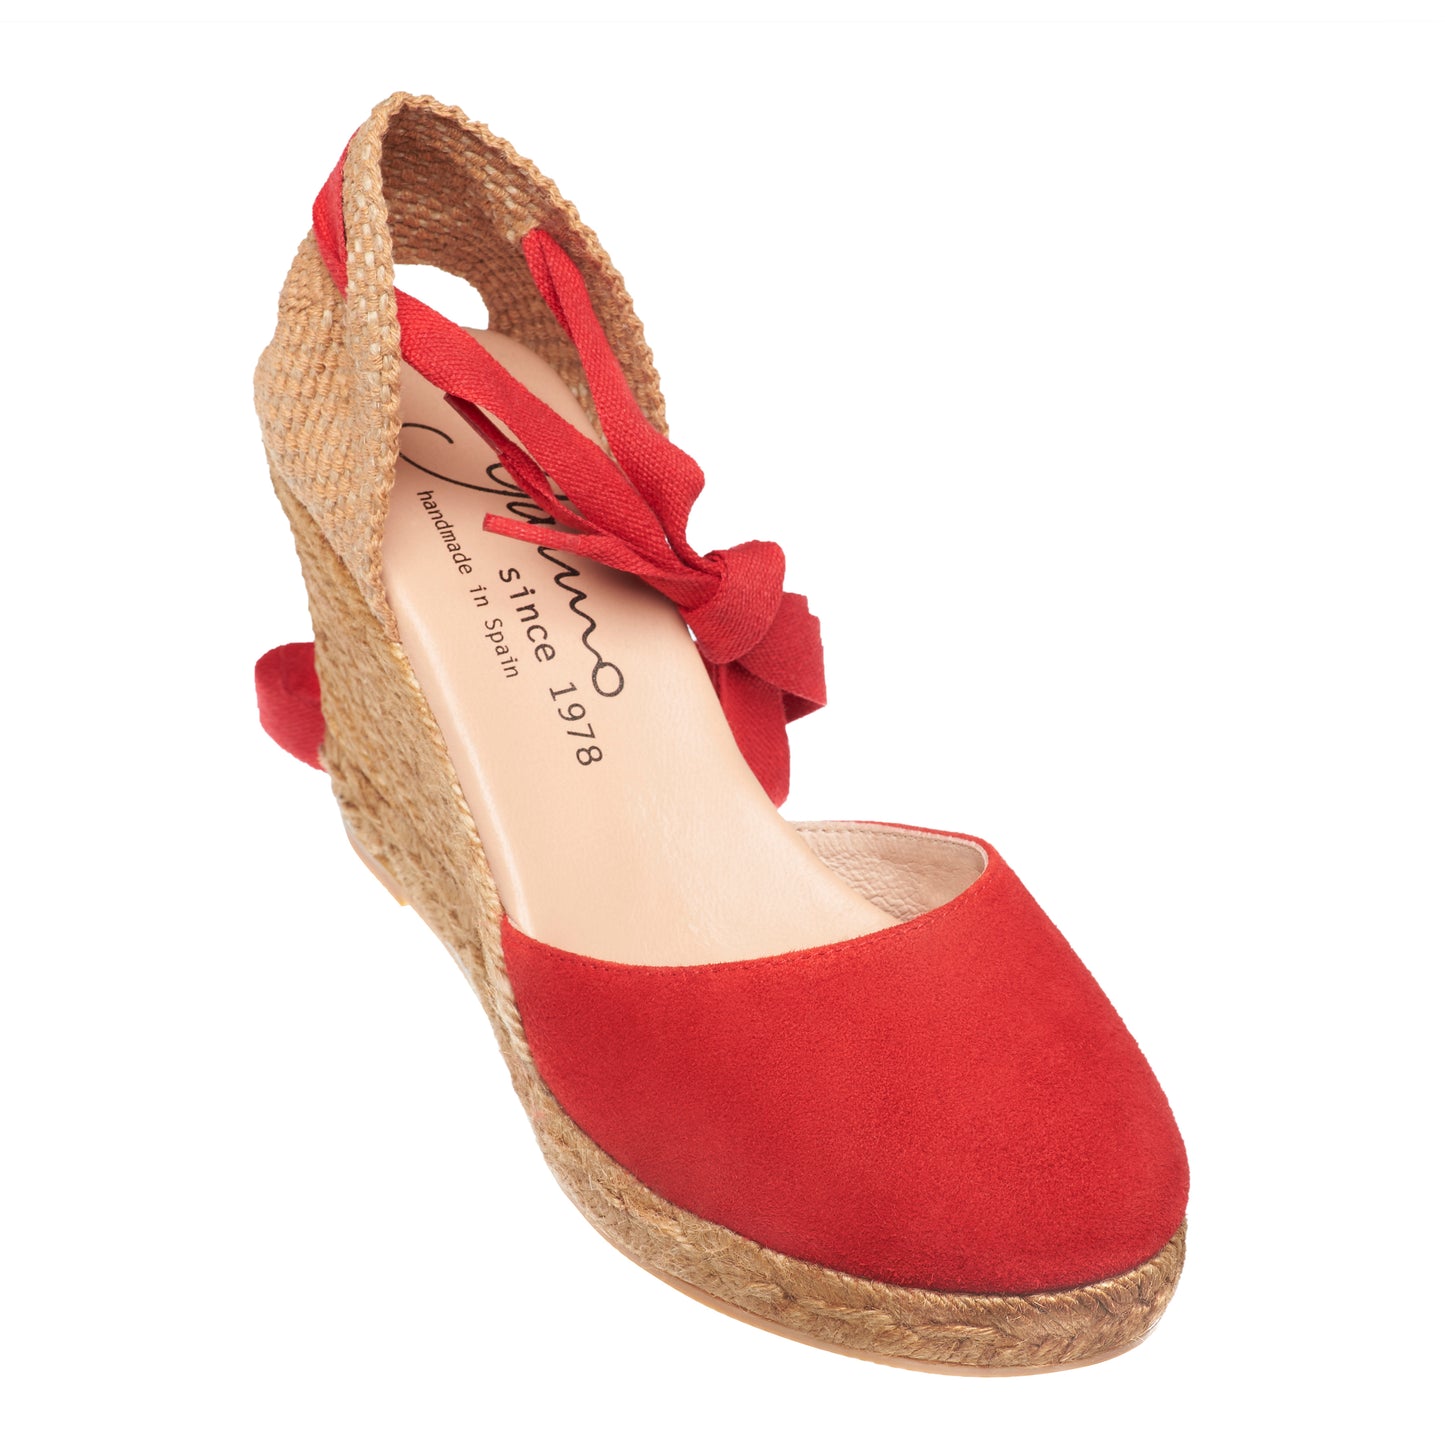 OBI Suede Red espadrilles wedges - Badt and Co